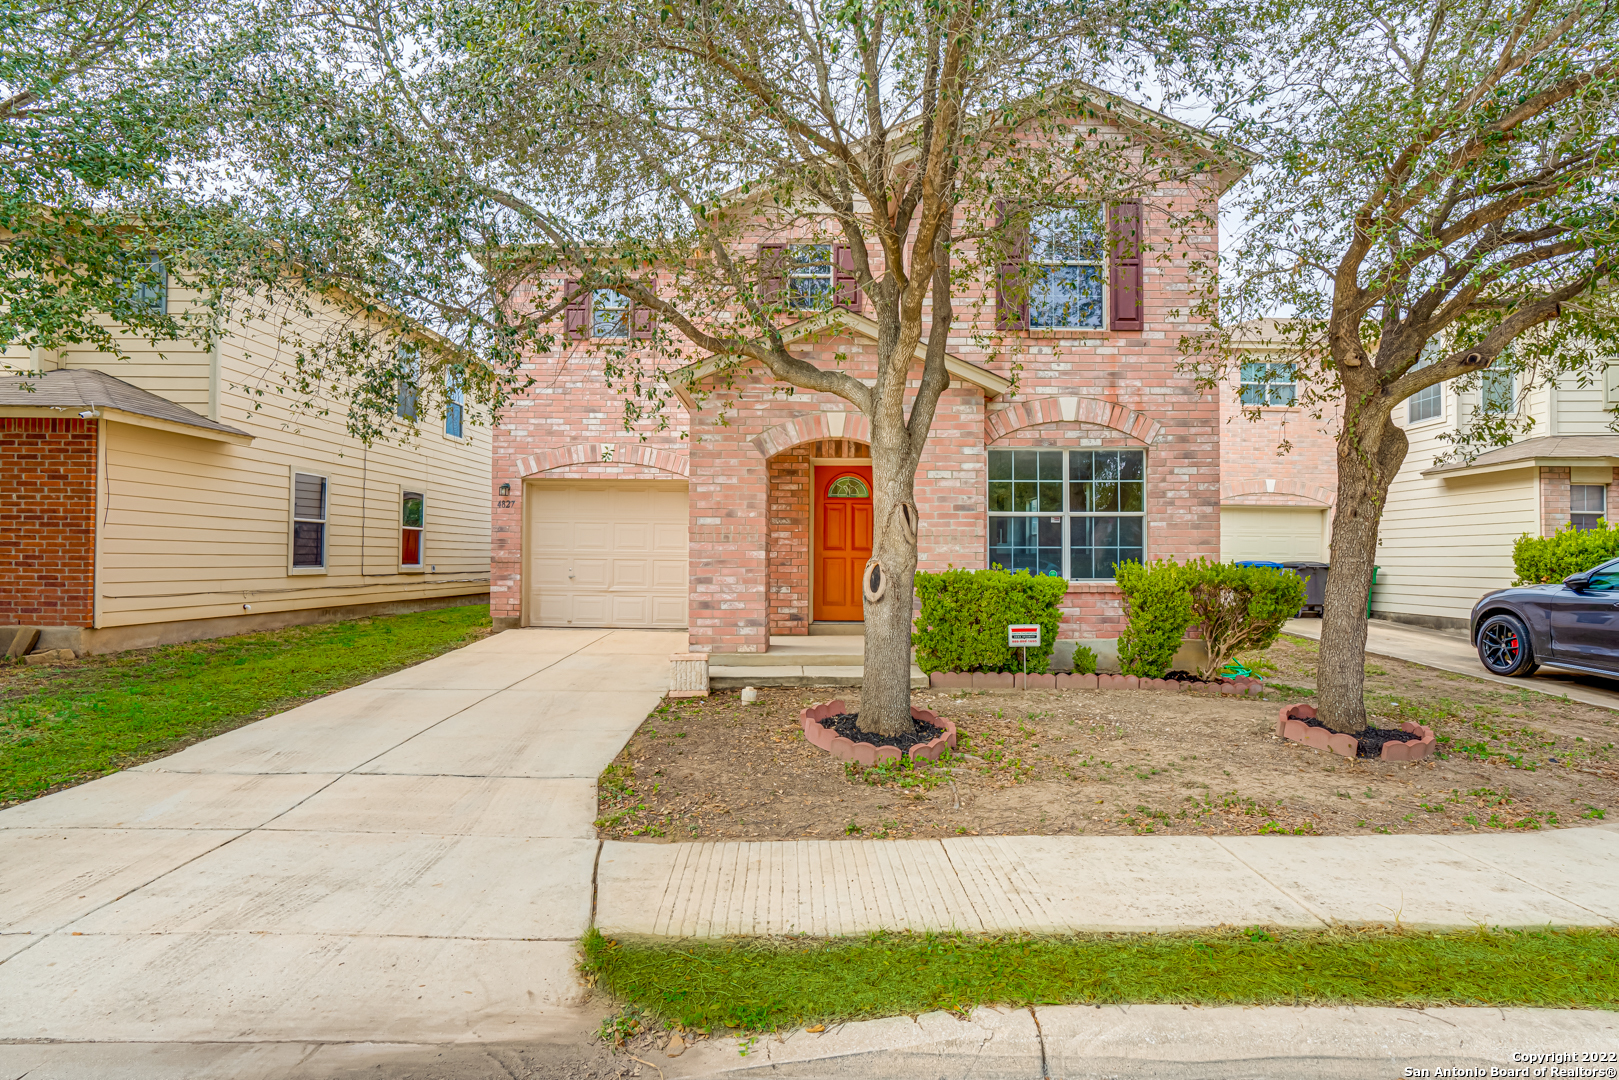 **OPEN HOUSE** Friday, 11/25/22, from 12pm - 1pm. Come home to relax in this quiet community in sought-after NISD! Spacious 3-bed, 2-1/2 bath home perfect home for first-time or upgrading buyer(s). HUGE kitchen space with newer fridge that conveys, alternate dining space, and flex space downstairs can be used as additional living area or office. Ceramic tile throughout open-concept first level with a half-bath. Upstairs are all bedrooms and two full bathrooms, as well as a spacious loft/game room for an additional getaway.  Carpet and laminate on second level except wet areas. Covered back porch with privacy-fenced back yard is perfect for unwinding or BBQs. Close to Loop 410 without all the noise. Take walking trails to Huebner Creek greenway, or ride your bike down bike paths around the neighborhood. Ingram Park Mall, Medical Center and tons of restaurants are only minutes away convenient for nearly any lifestyle. Come and see it today!